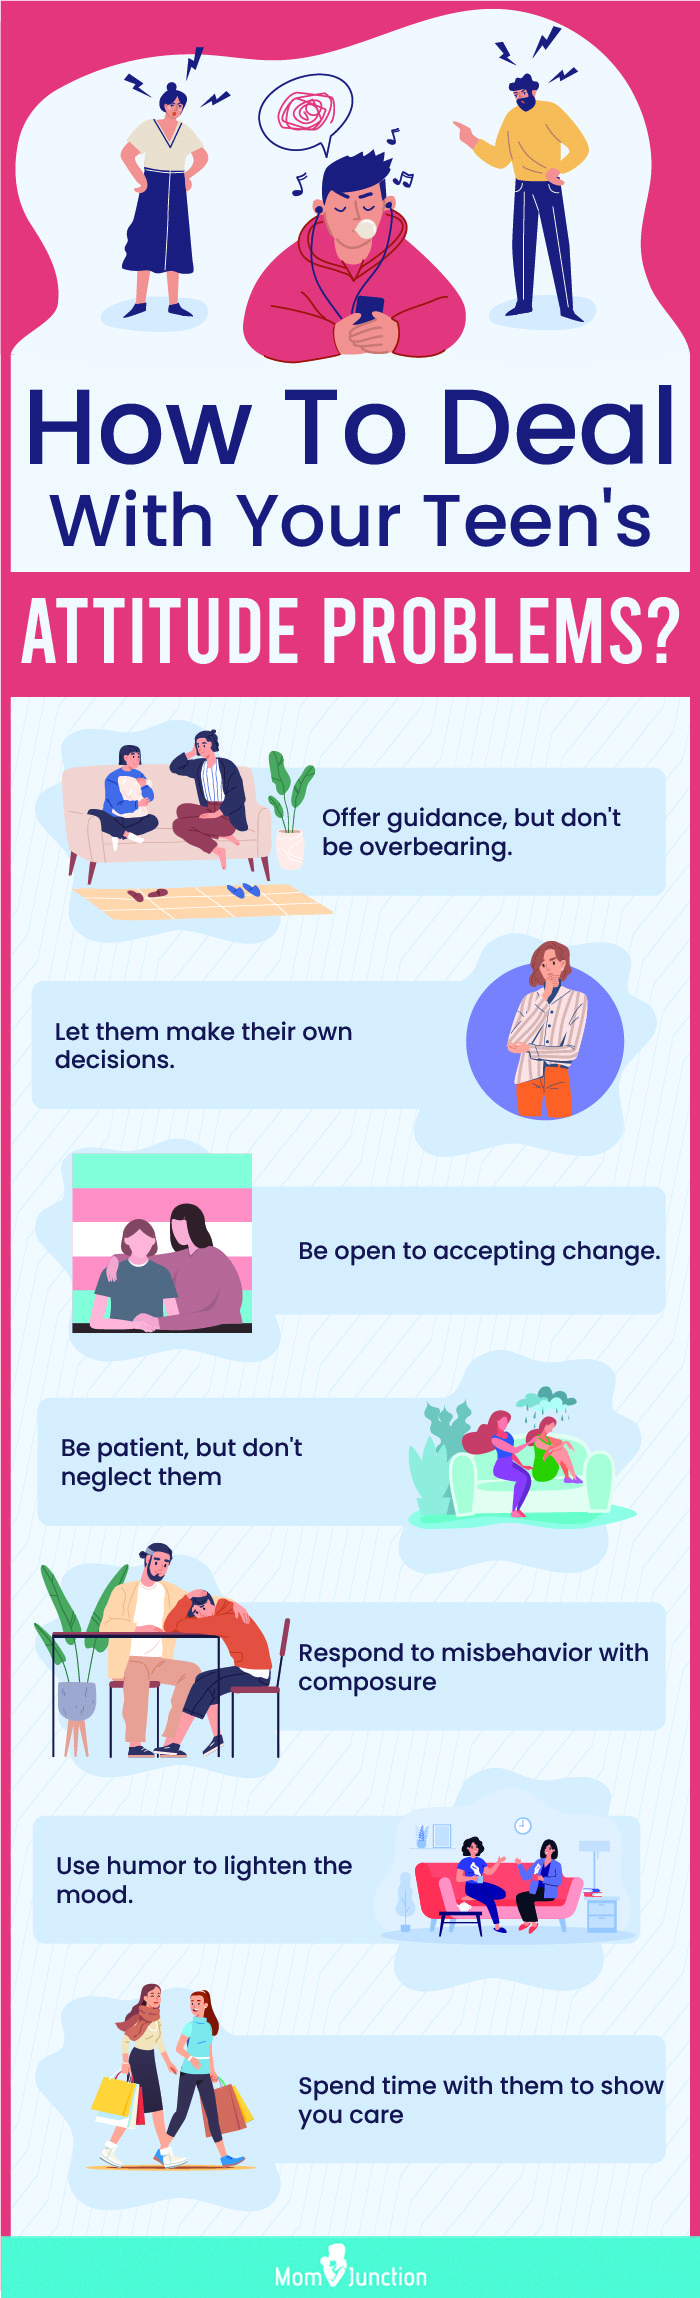 ways to deal with teenage attitude problems [infographic]